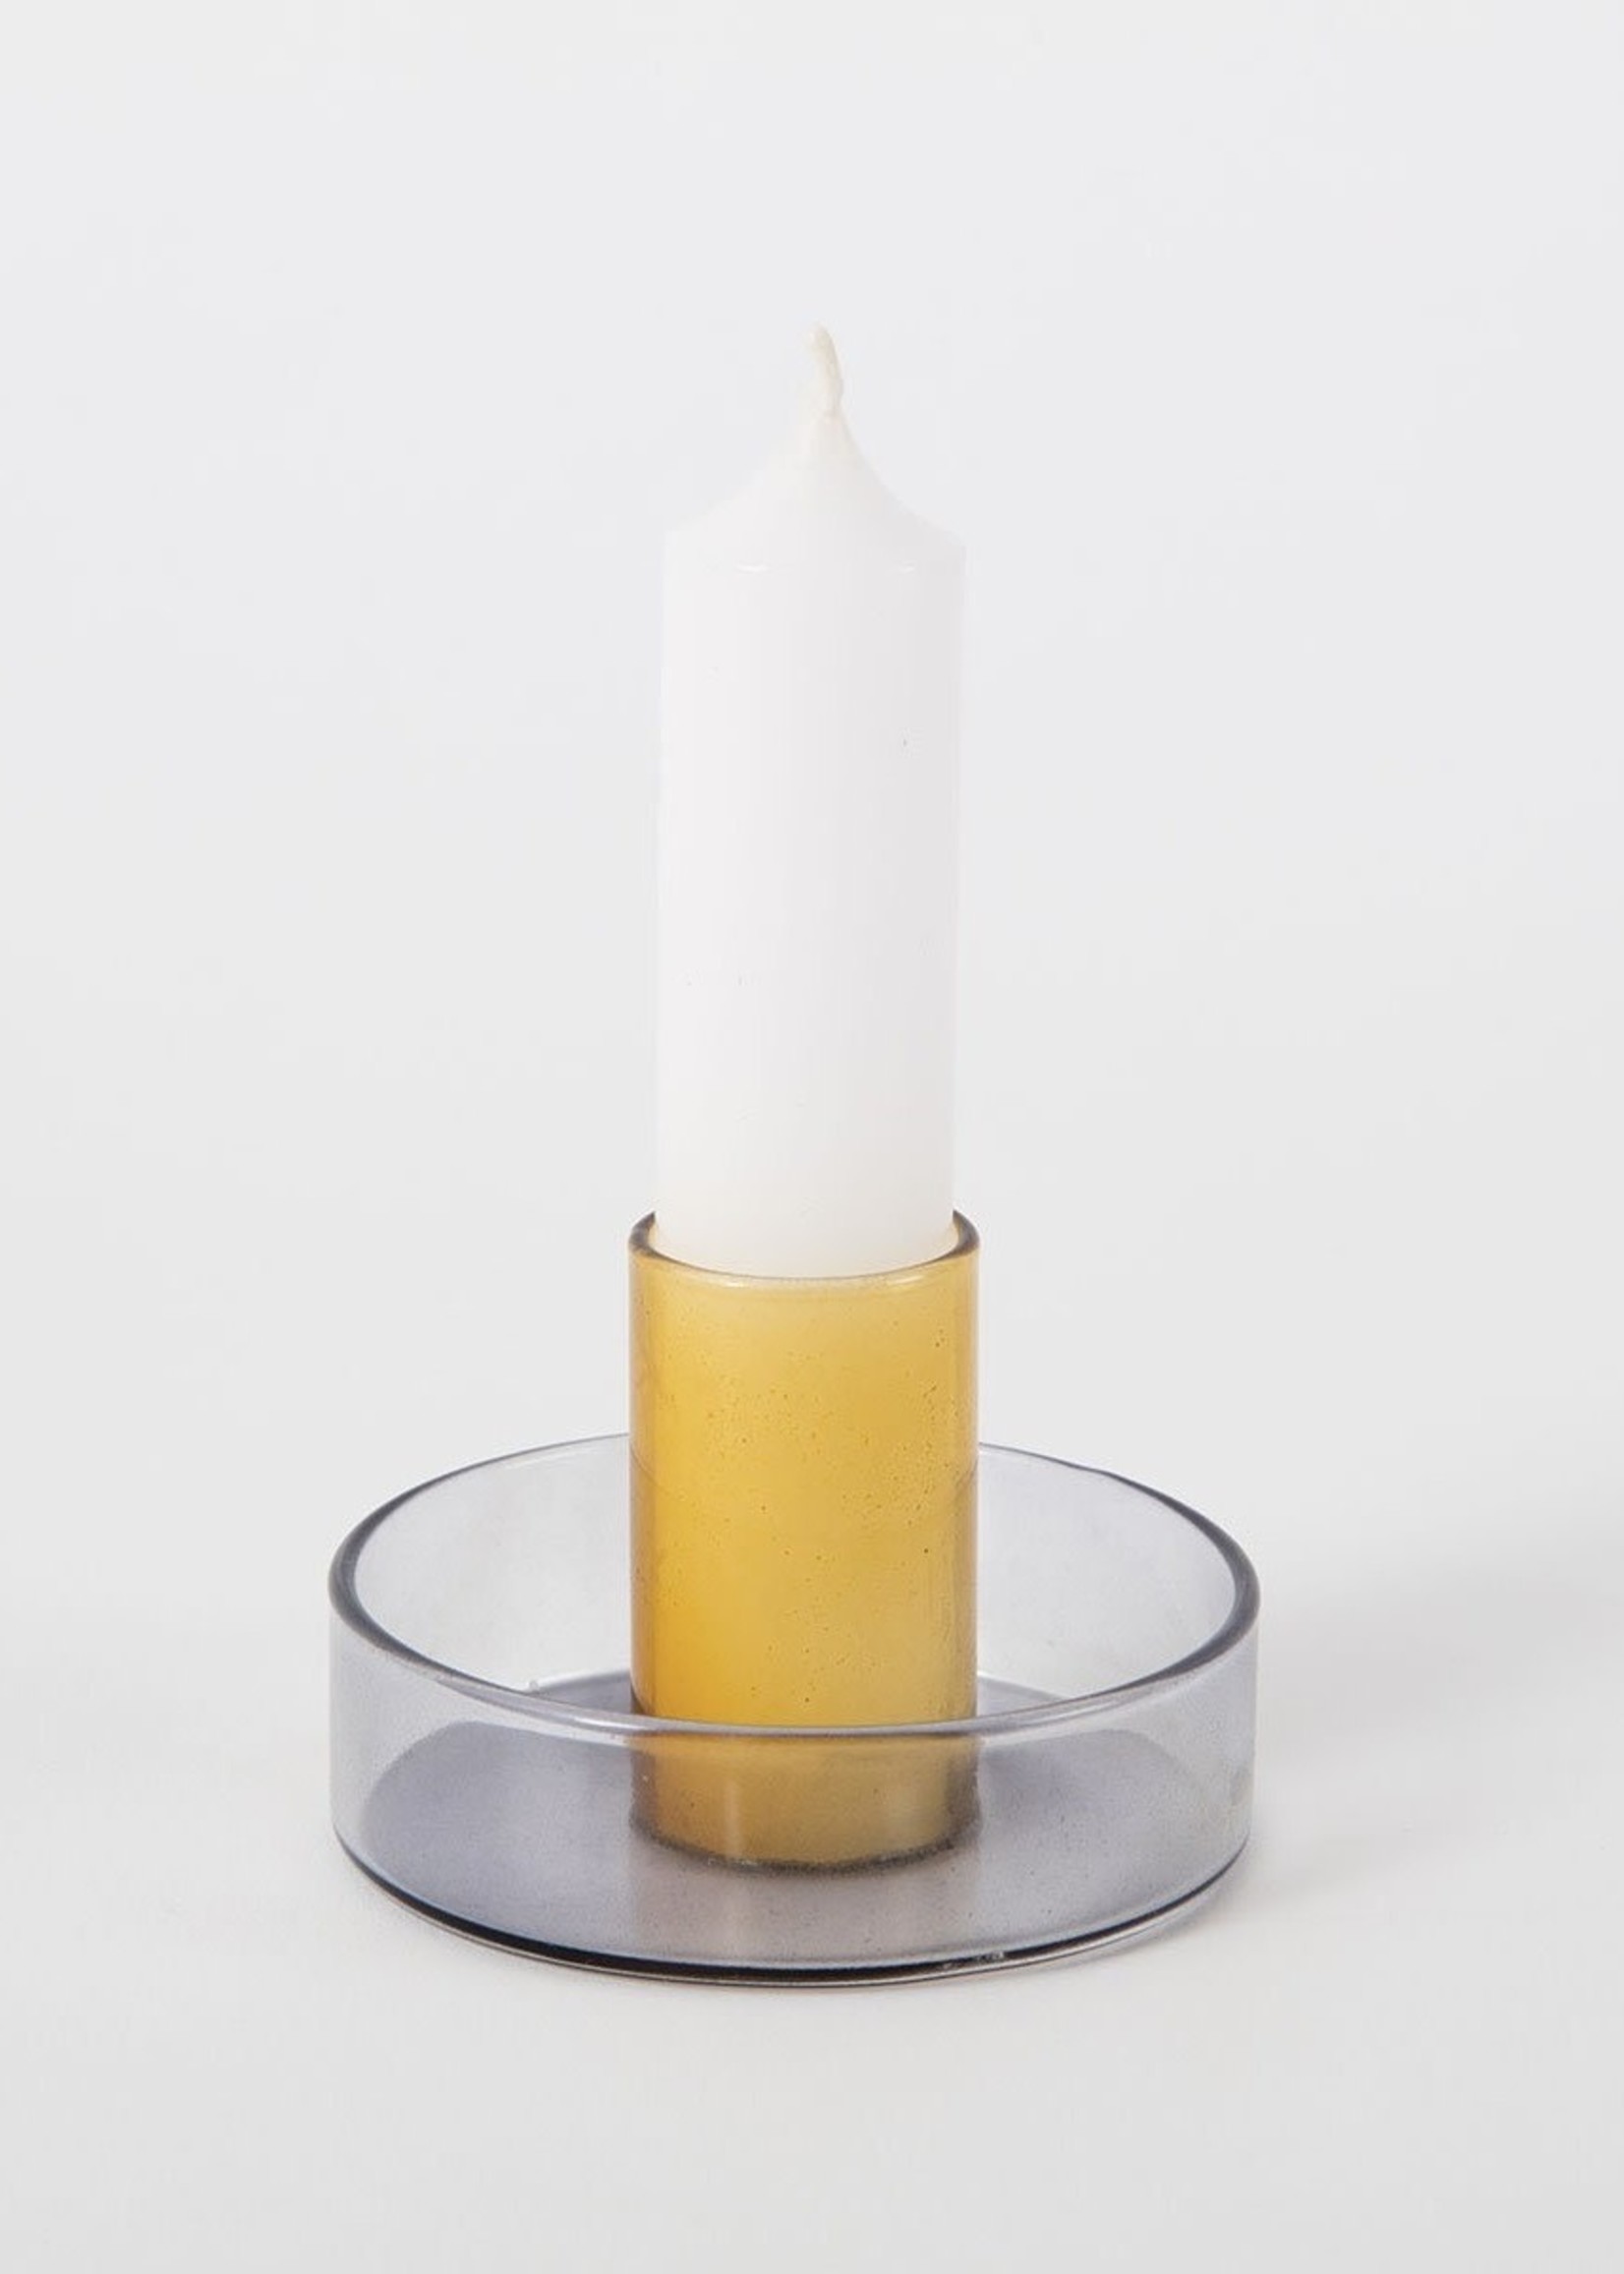 Block Design Limited Duo Tone Candle Holder by Block Design